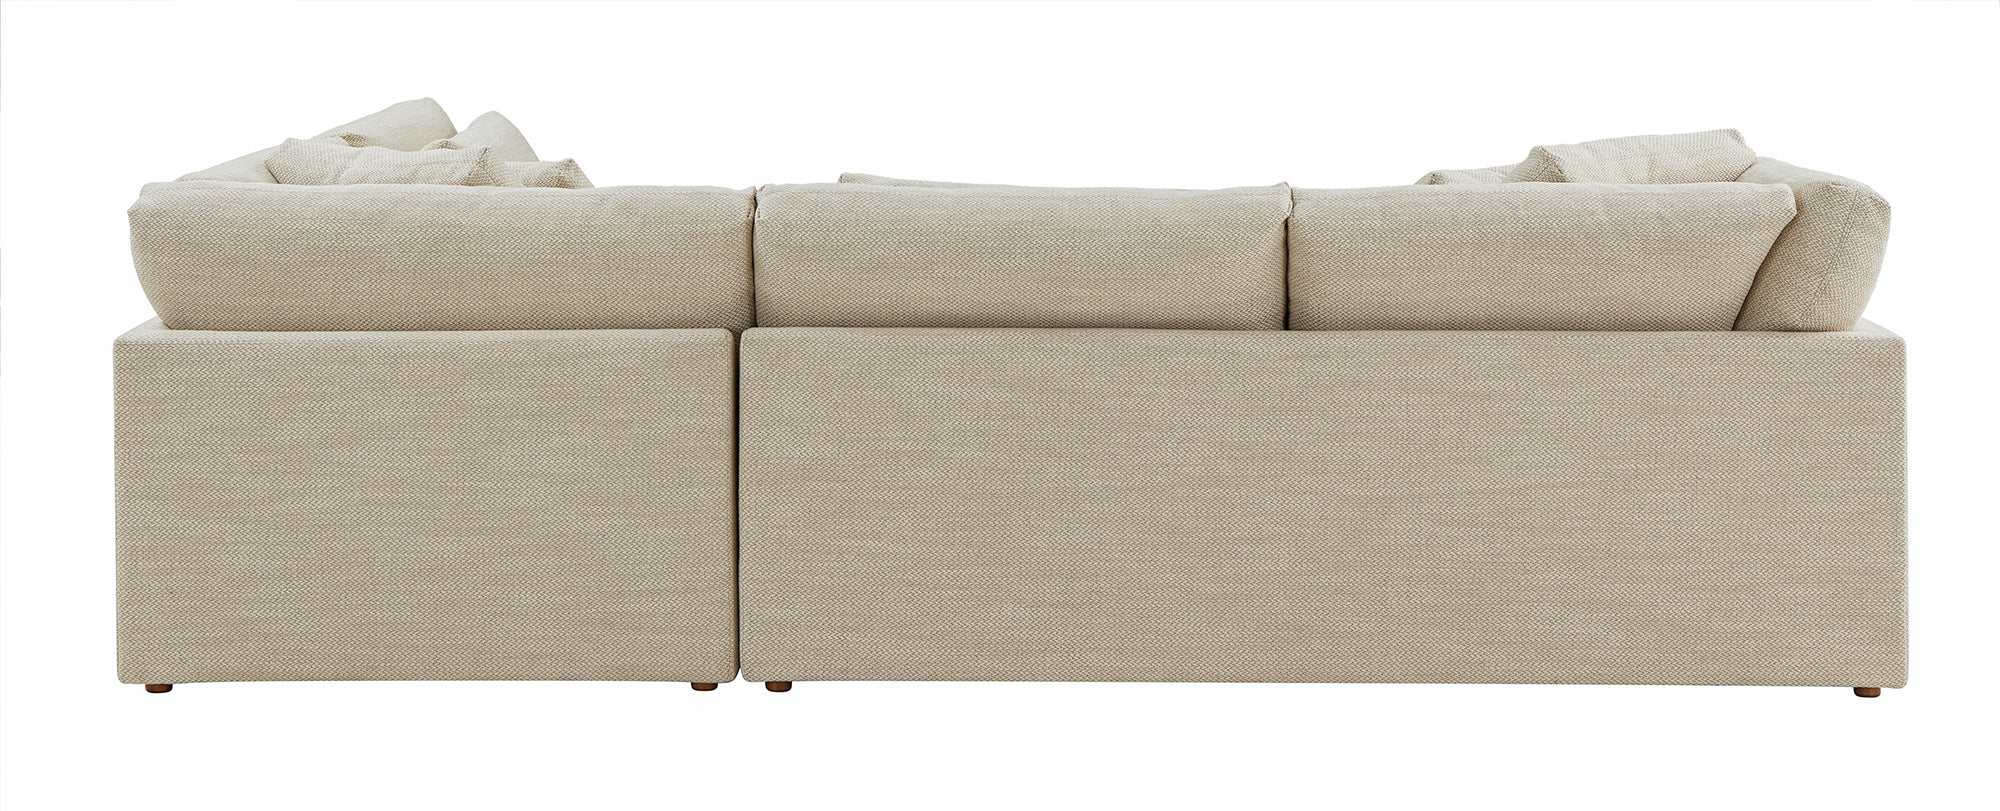 Feel Good Sectional with Ottoman, Right, Oyster - Image 6